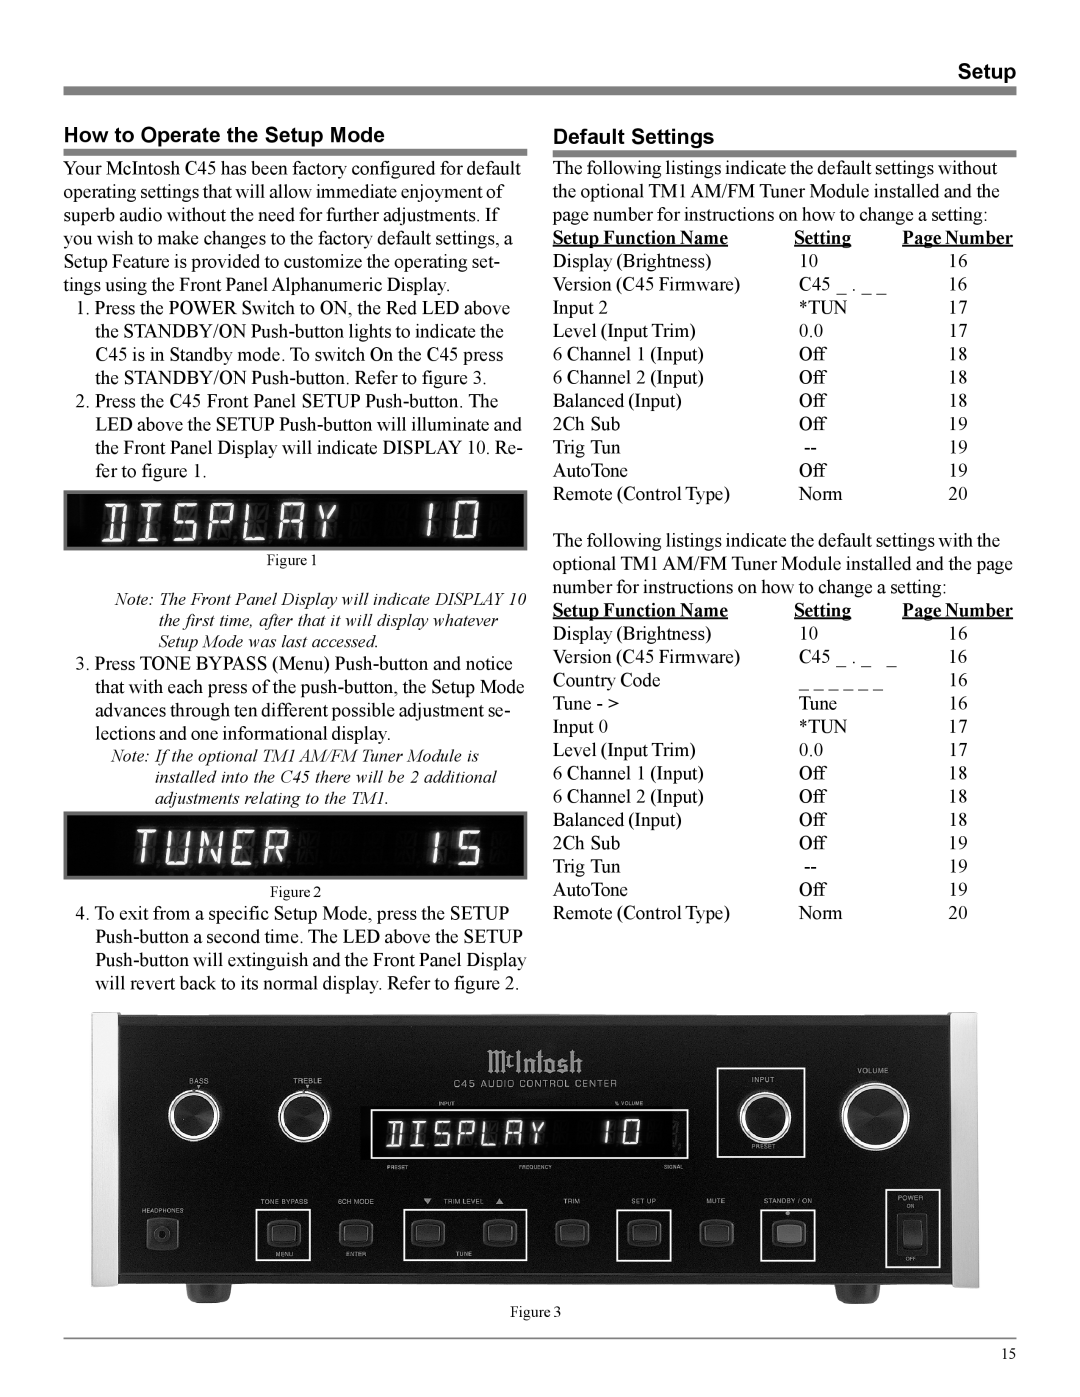 McIntosh C45 owner manual How to Operate the Setup Mode, Default Settings, Setup Function Name 